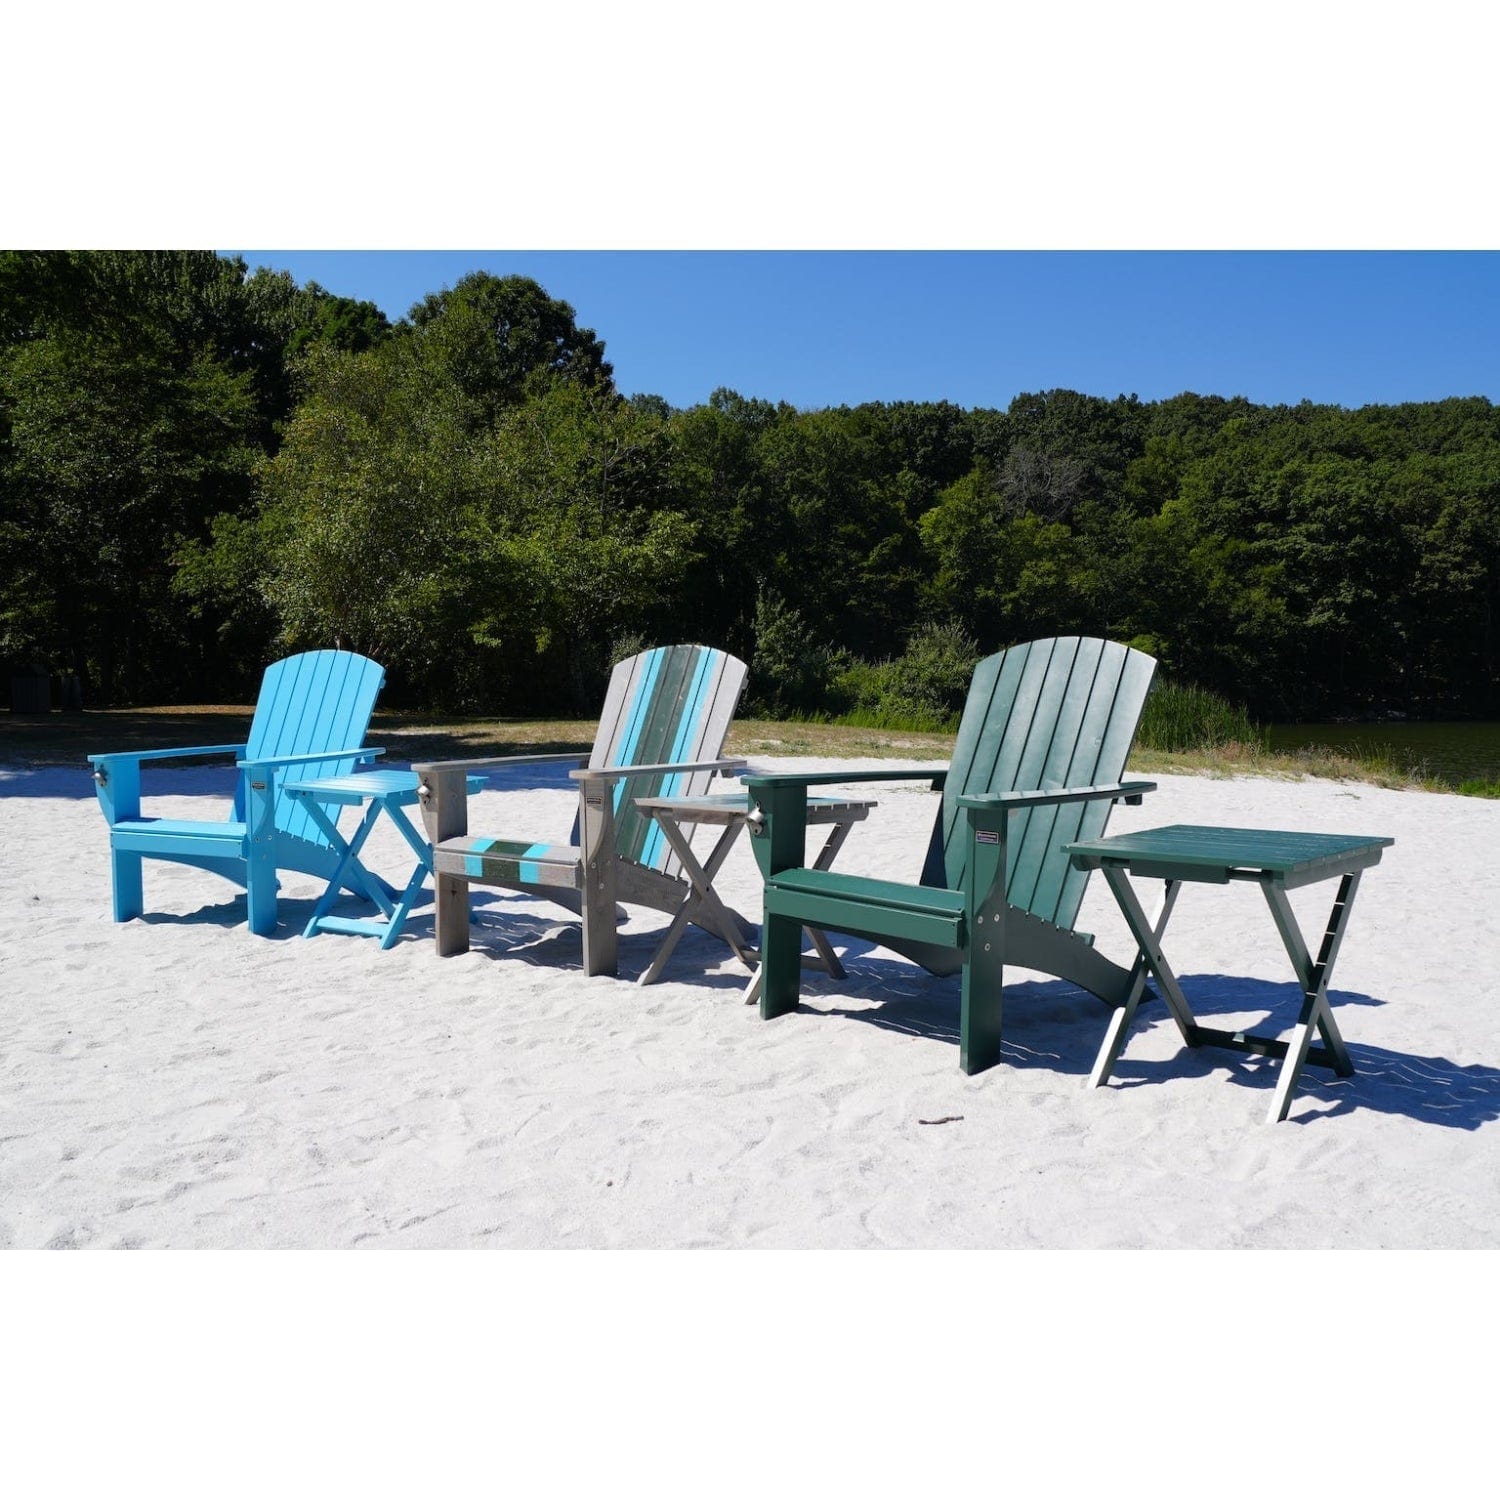 Riverstone Industries Outdoor Chairs Riverstone | Adirondack Chair with Side Table - Racing Grey RSI-AC-DG-T